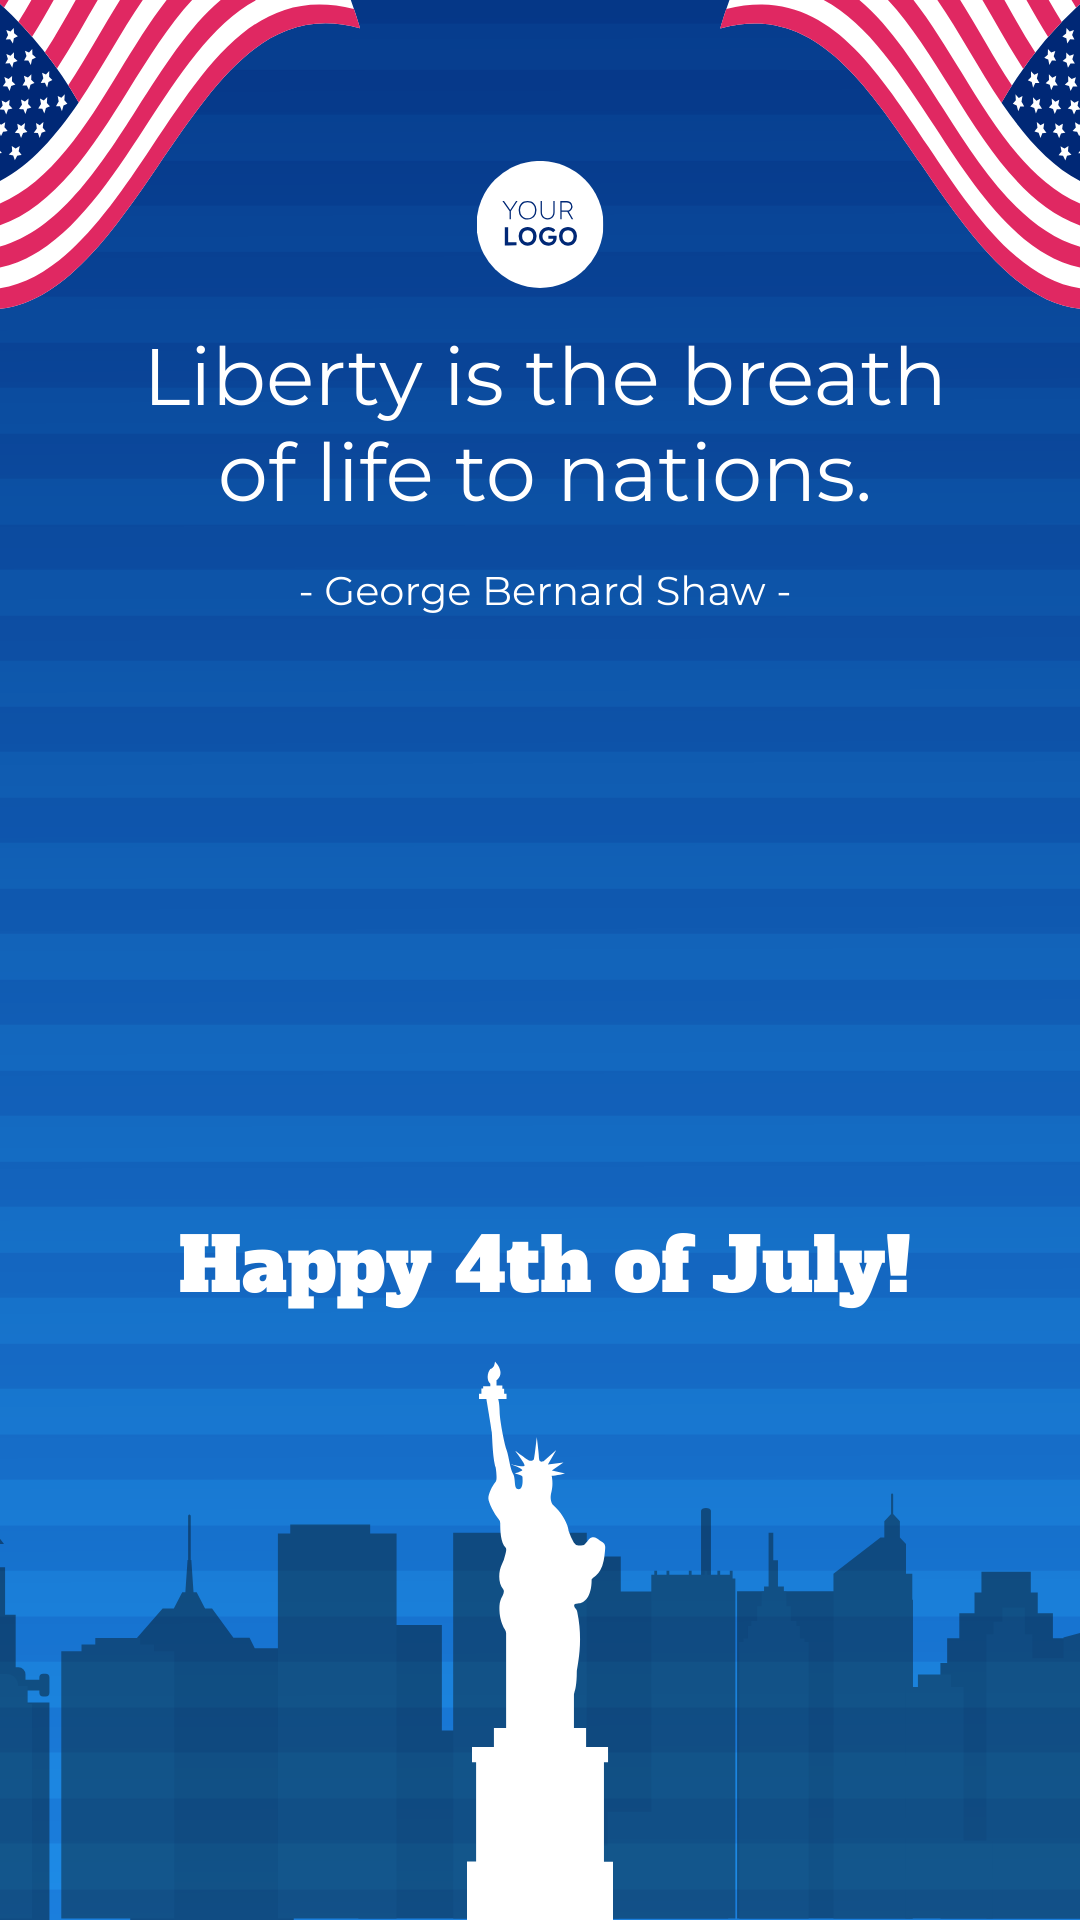 4th of July Instagram Quote